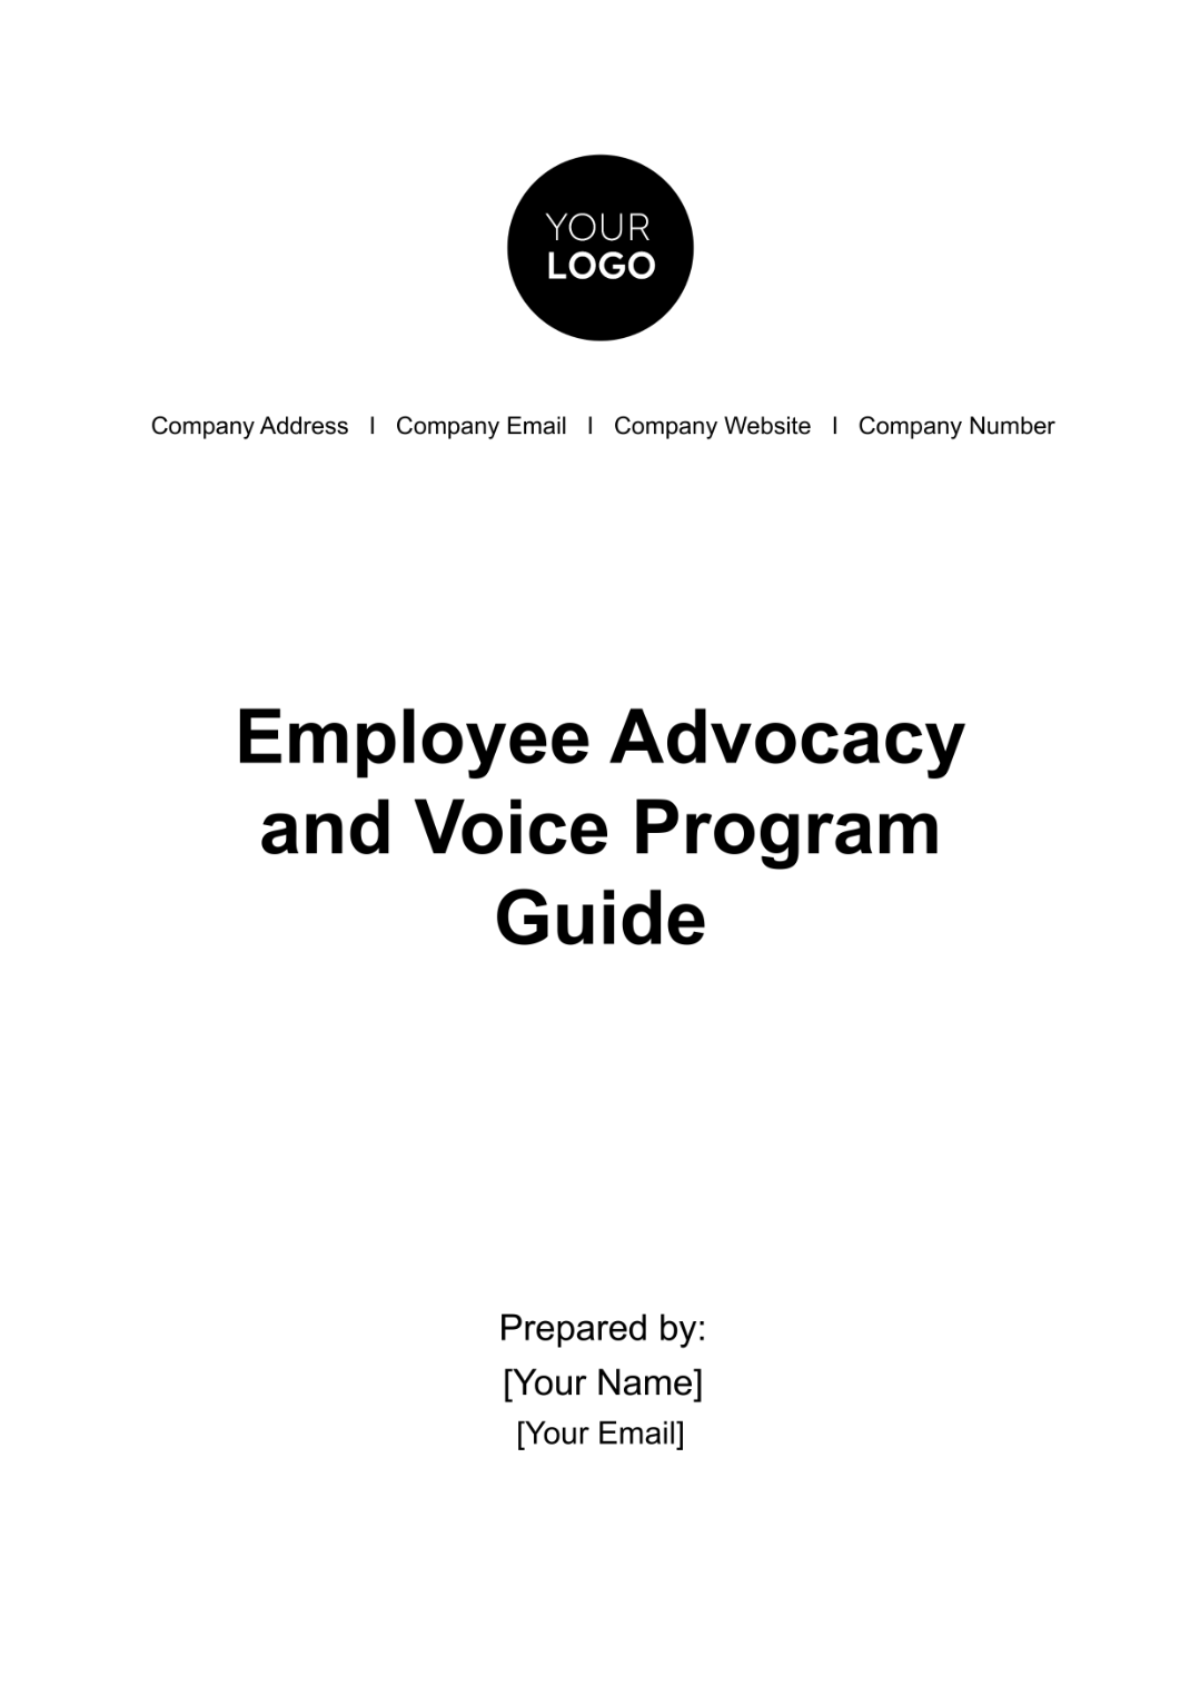 Employee Advocacy and Voice Program Guide HR Template